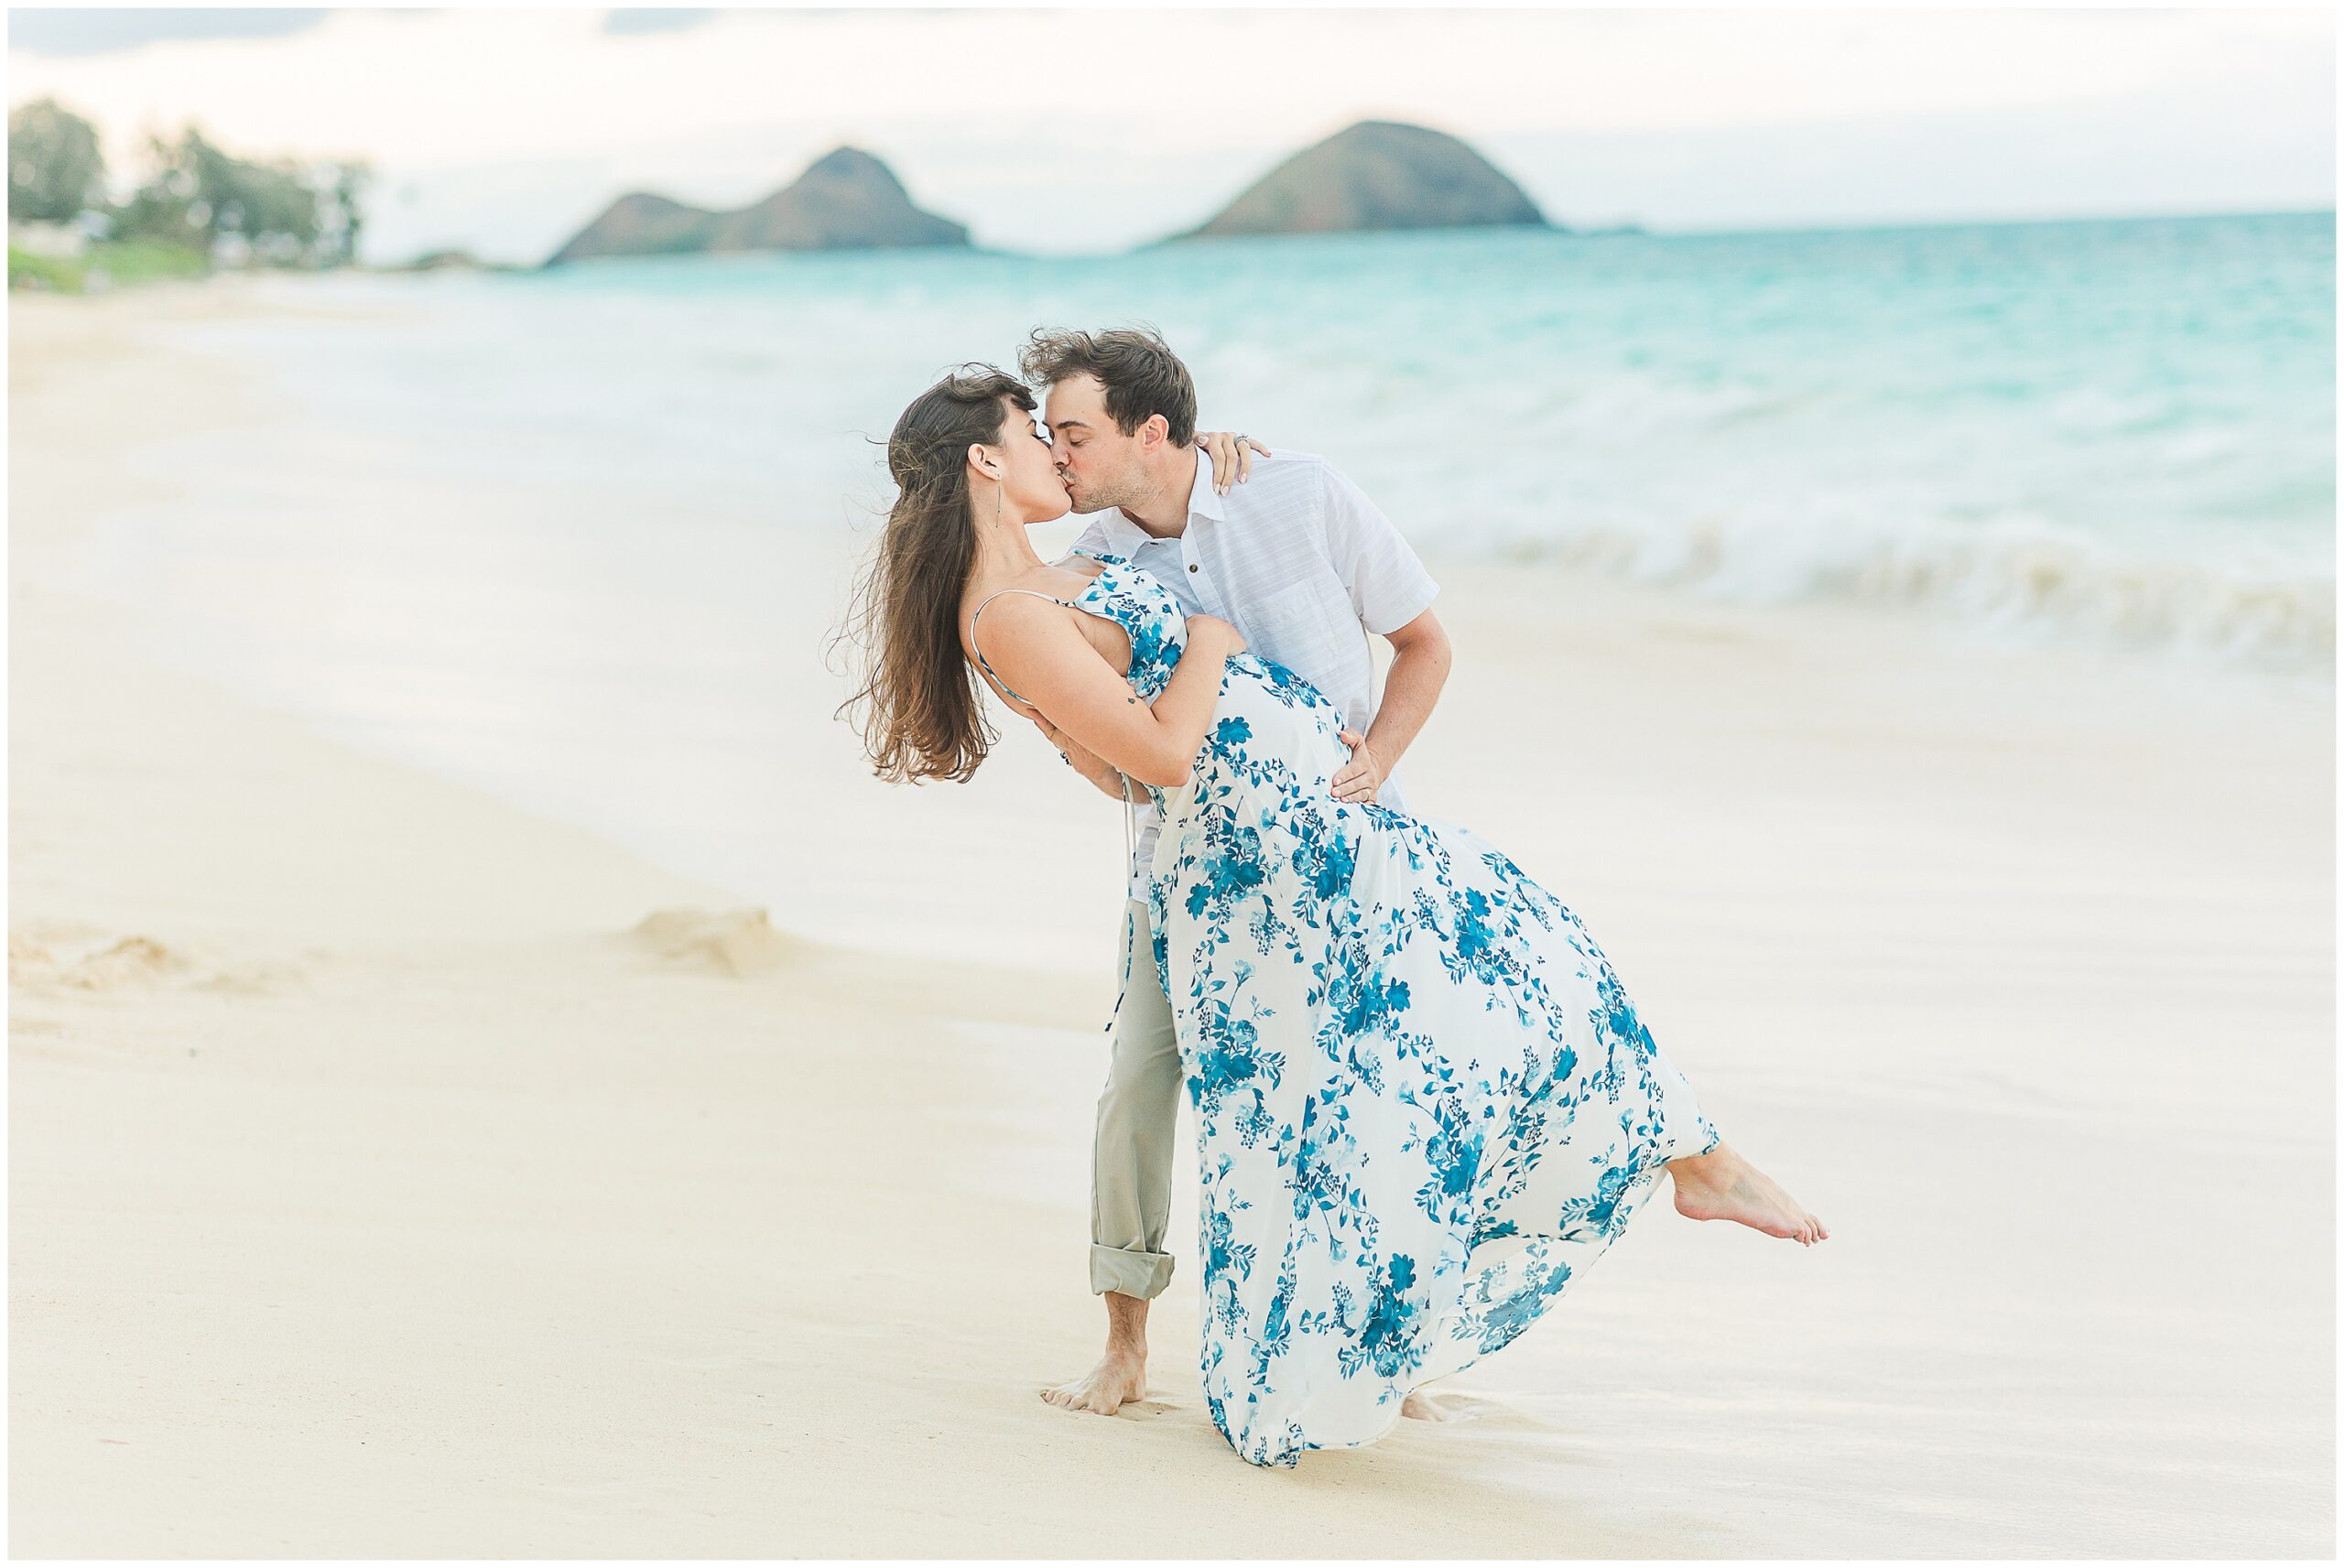 Maternity portrait of a woman in a white dress with blue florals and her husband holding her on the beach.